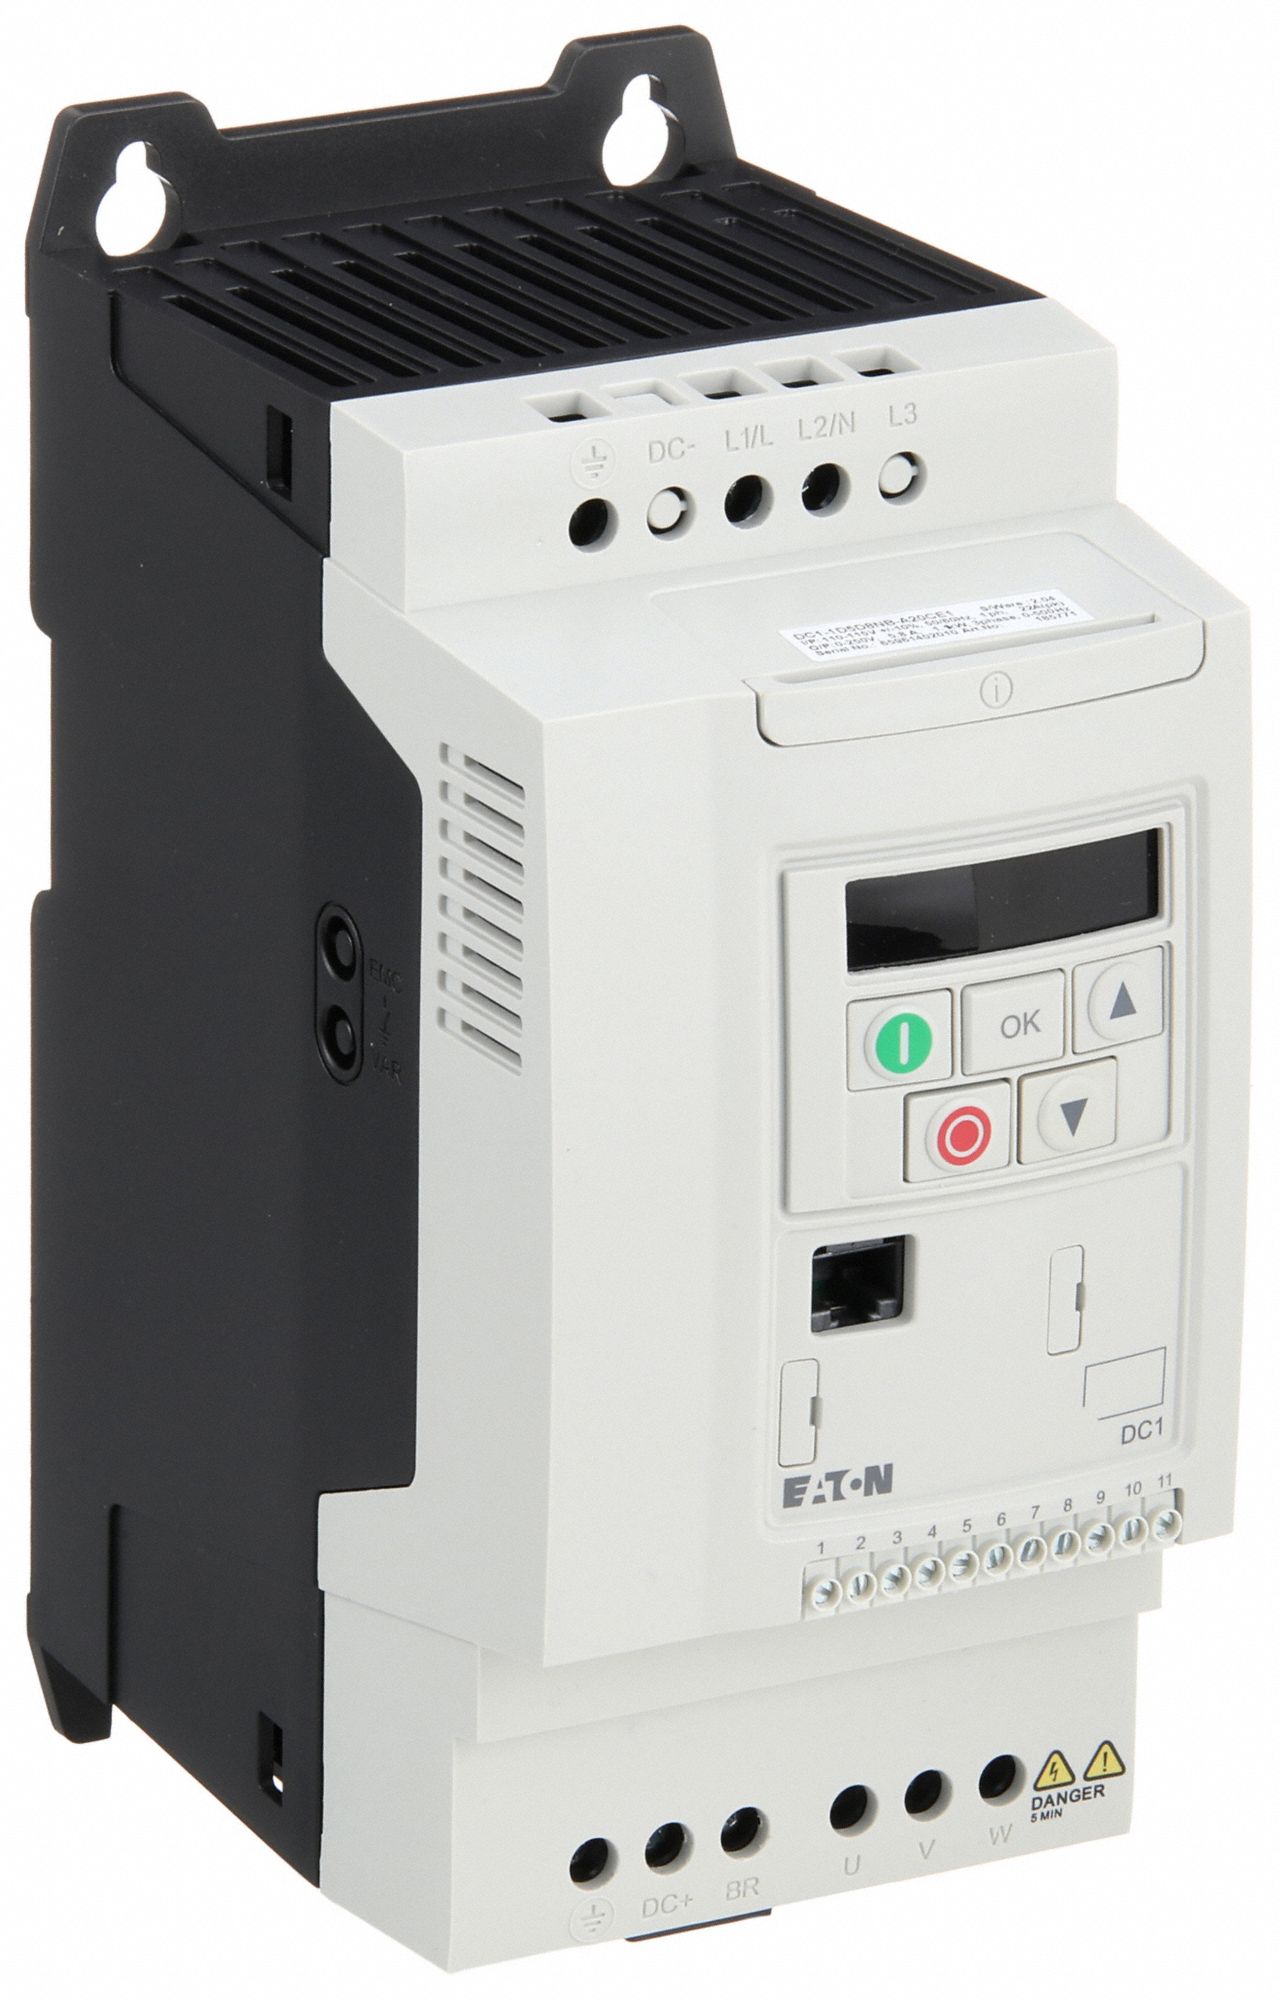 EATON, 240V AC, 2 hp Max Output Power, Variable Frequency Drive